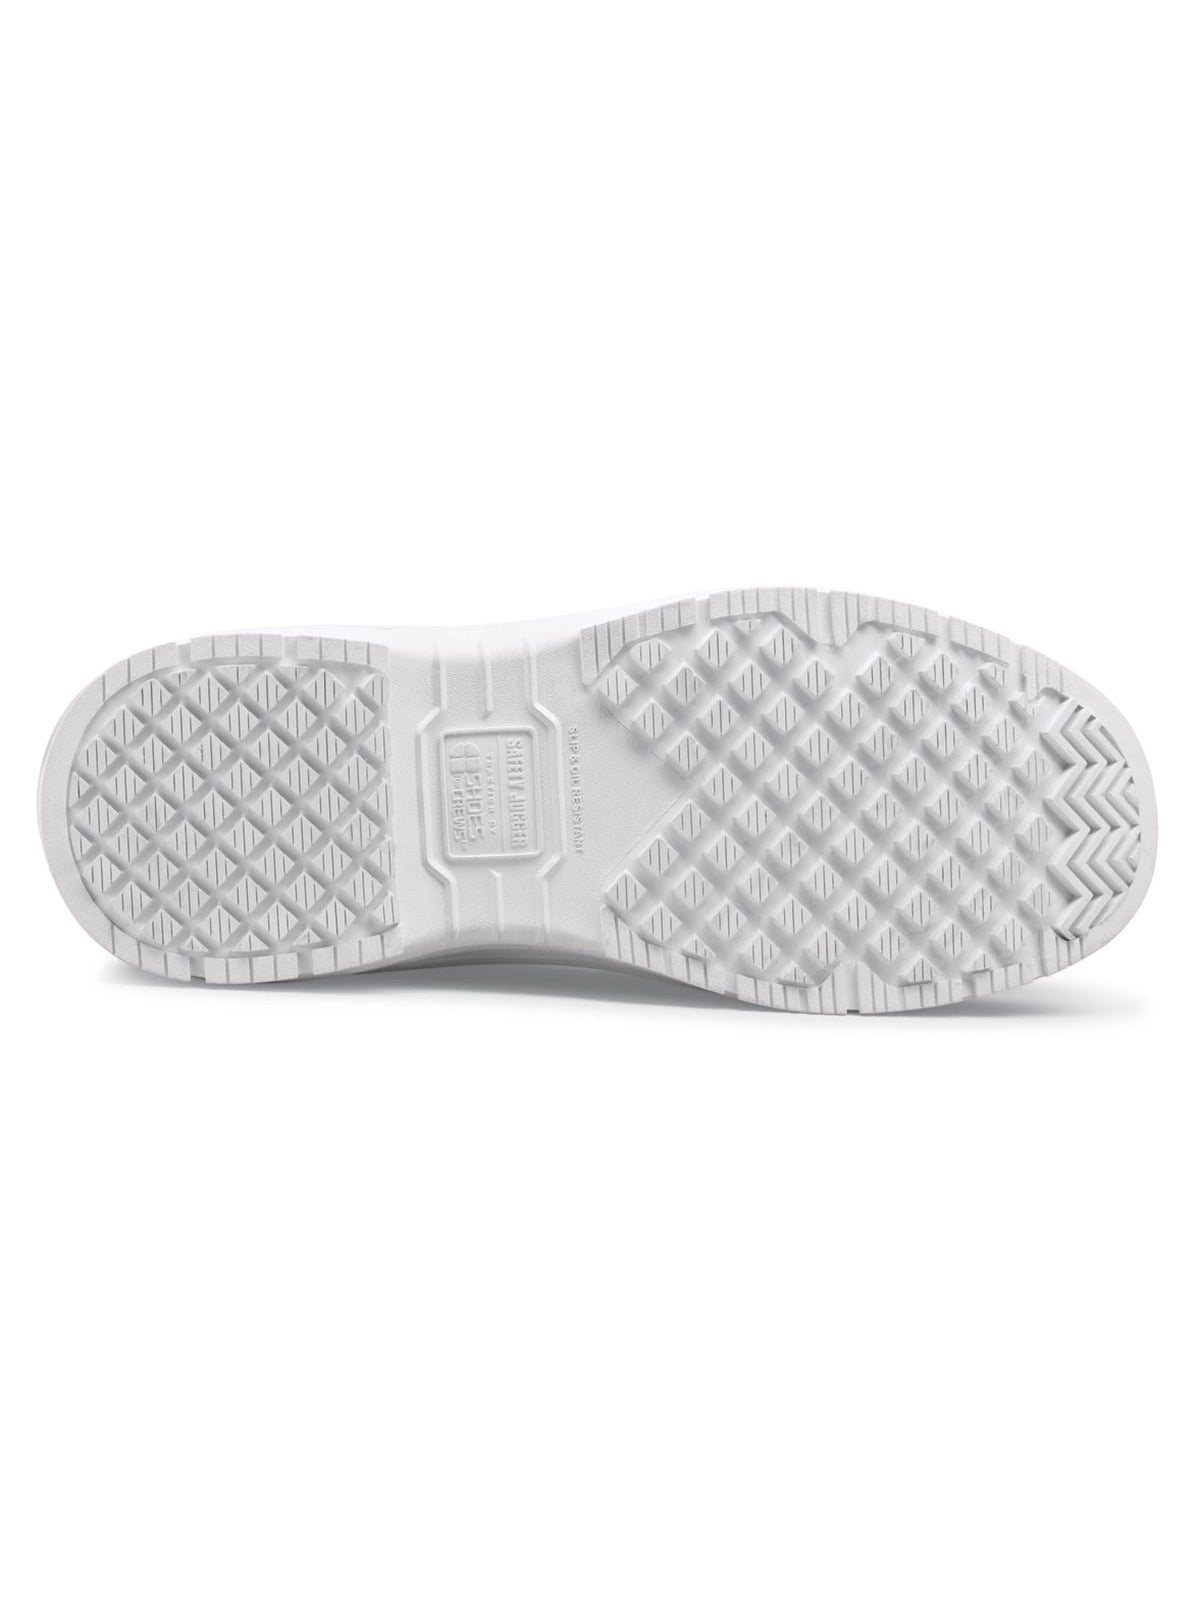 Unisex Work Shoe Gusto81 White (S3) by Safety Jogger -  ChefsCotton